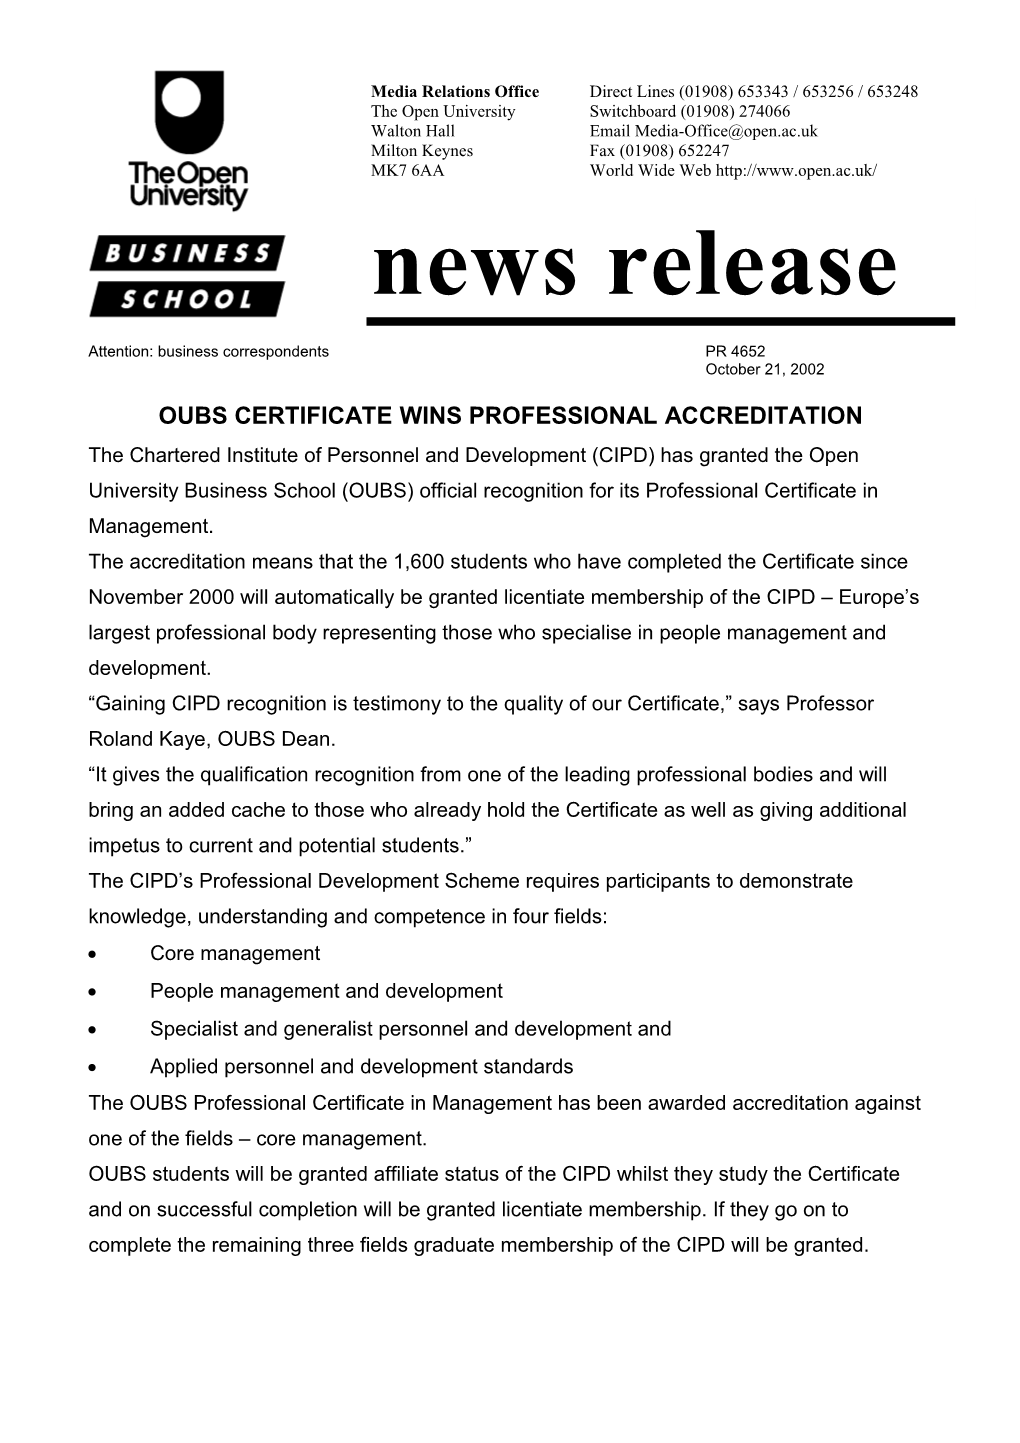 Oubs Certificate Wins Professional Accreditation